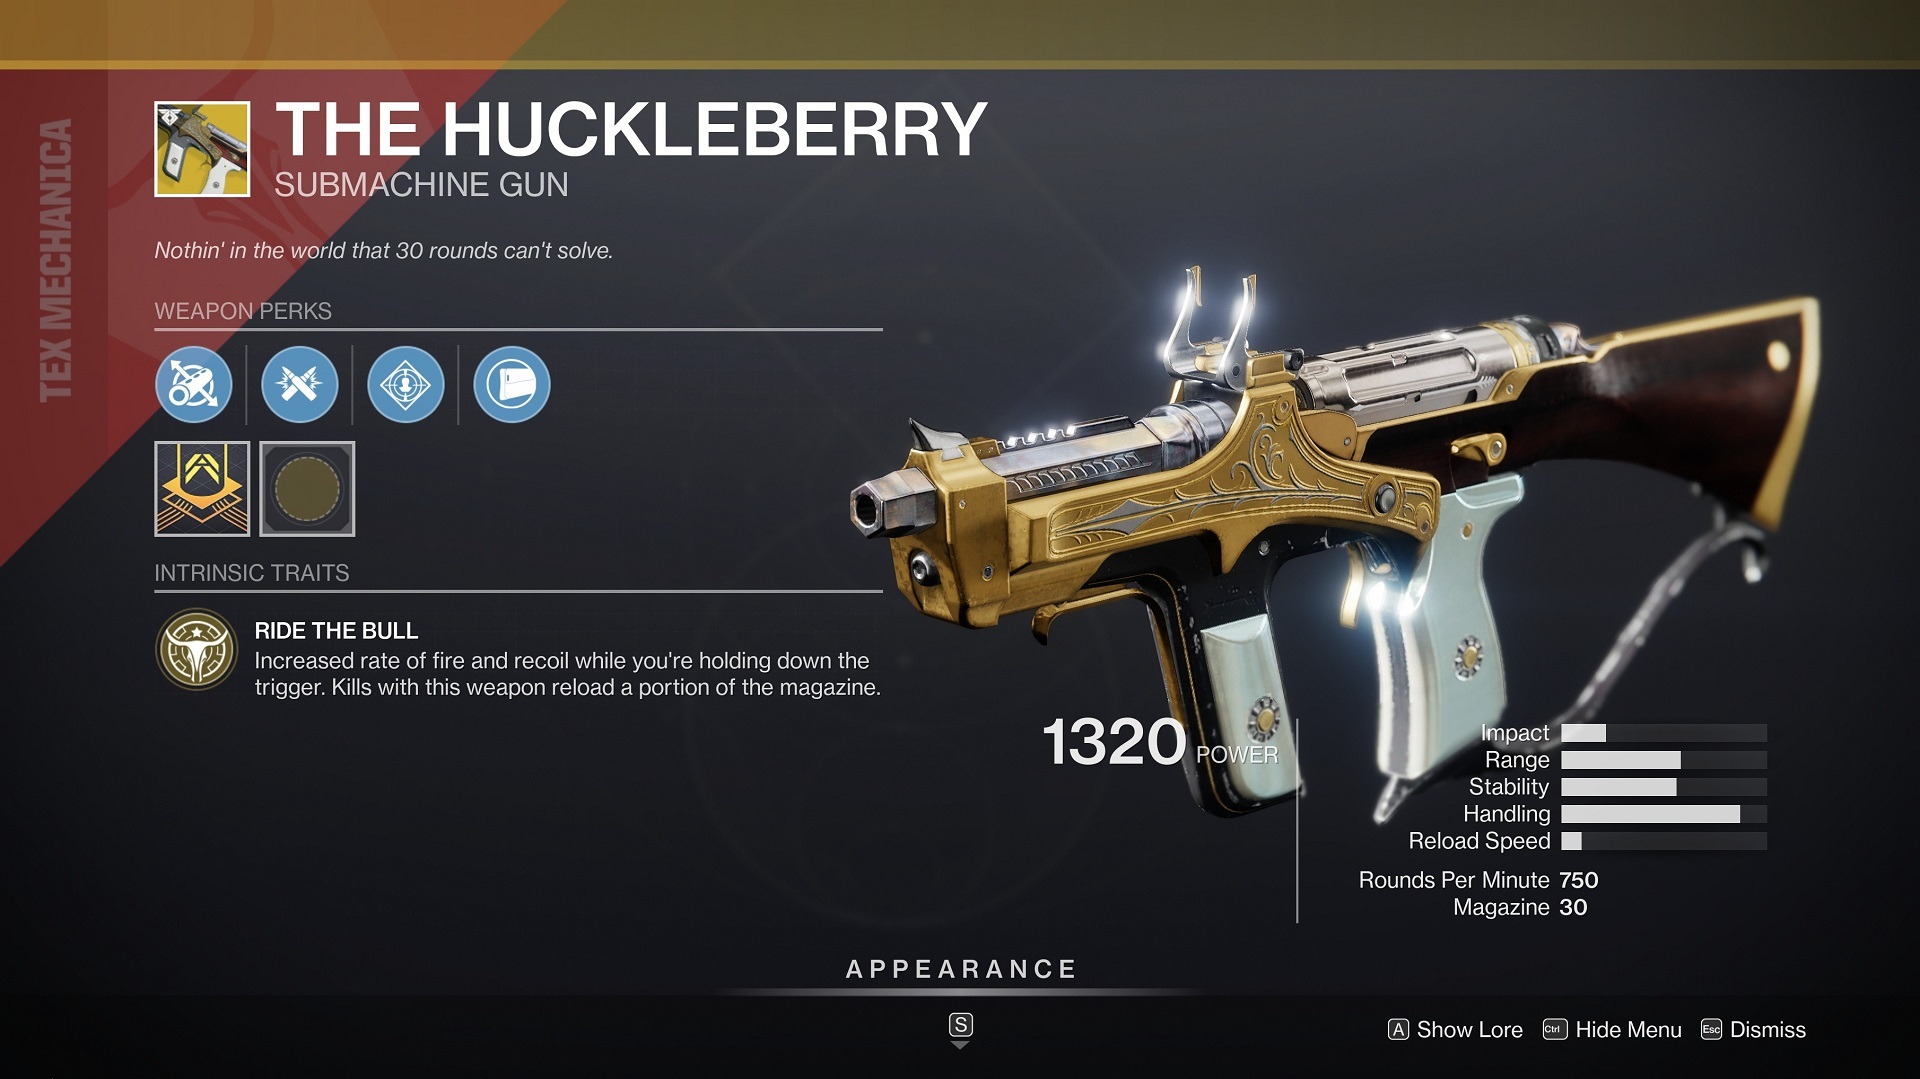 The goal of The Huckleberry is to just hold down the trigger and kill everything in your path.